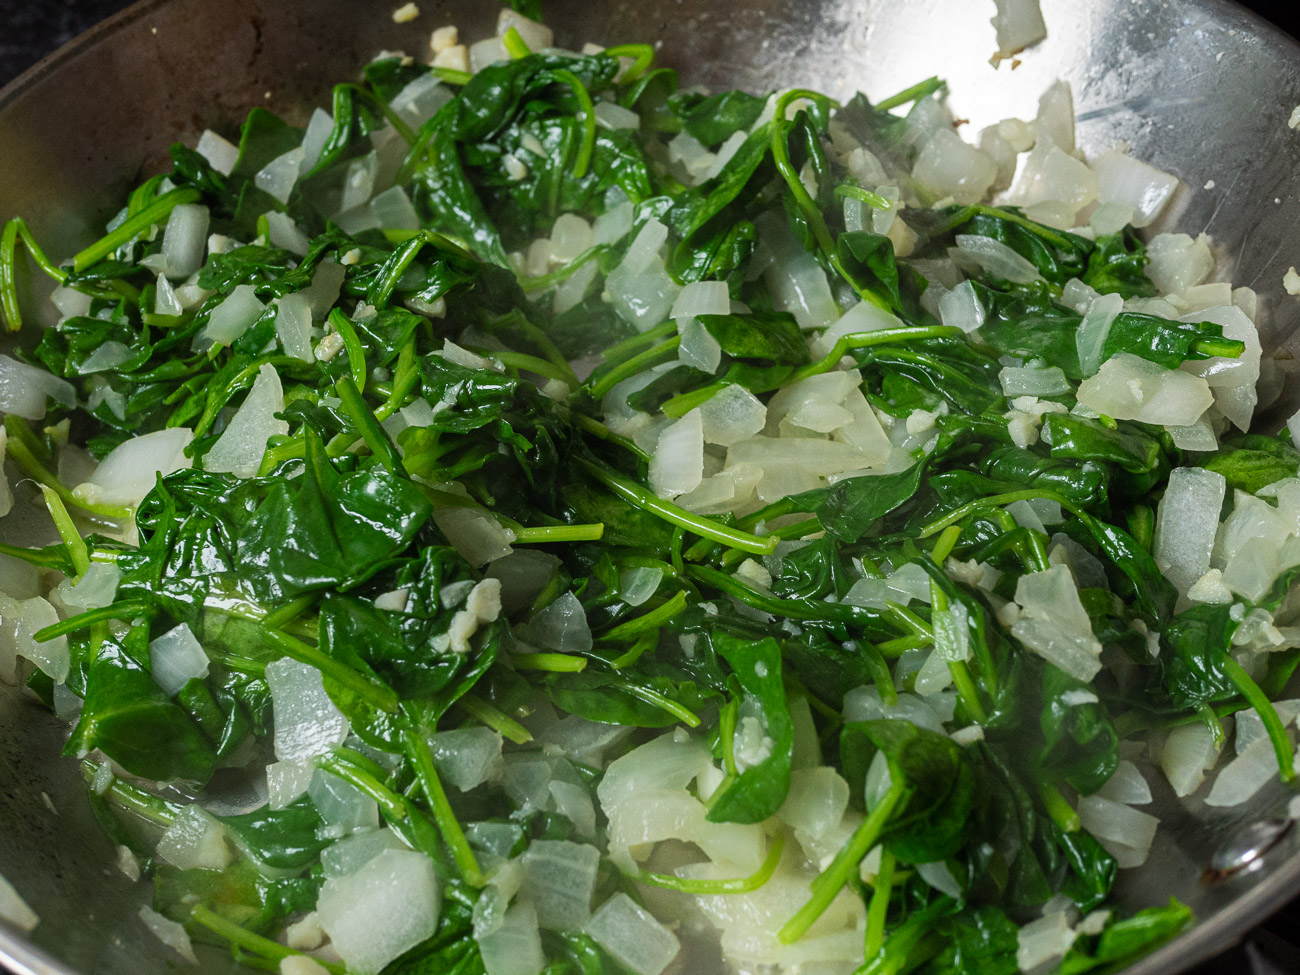 Add spinach and cook until wilted, 3-4 minutes. Season to taste with salt and pepper.